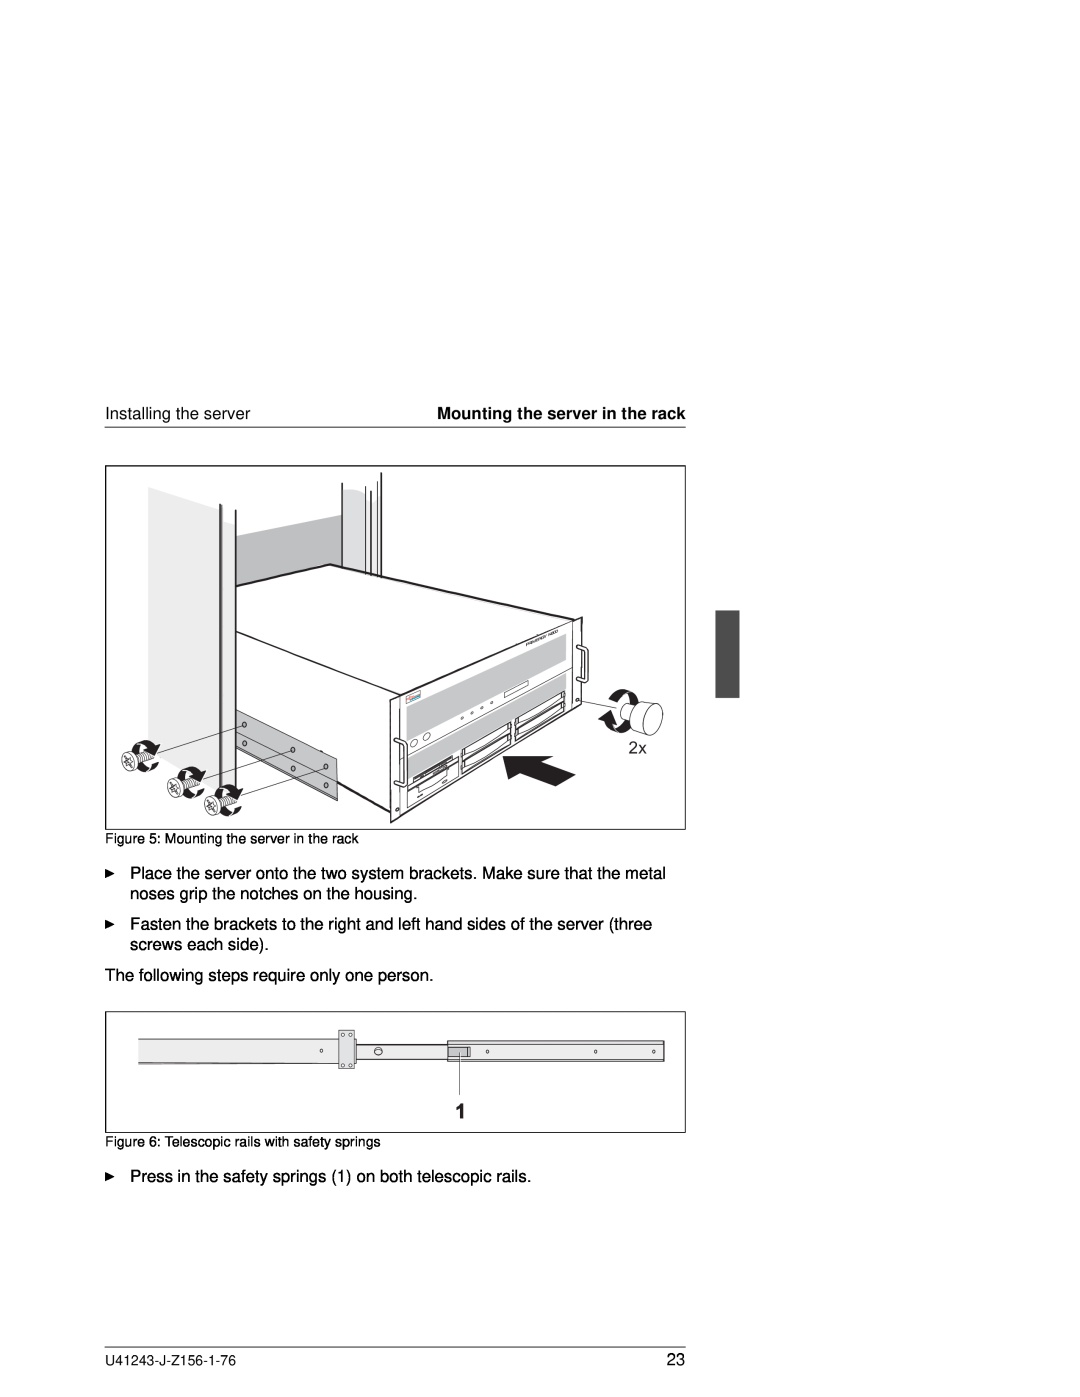 Fujitsu N800 manual Installing the server, The following steps require only one person 